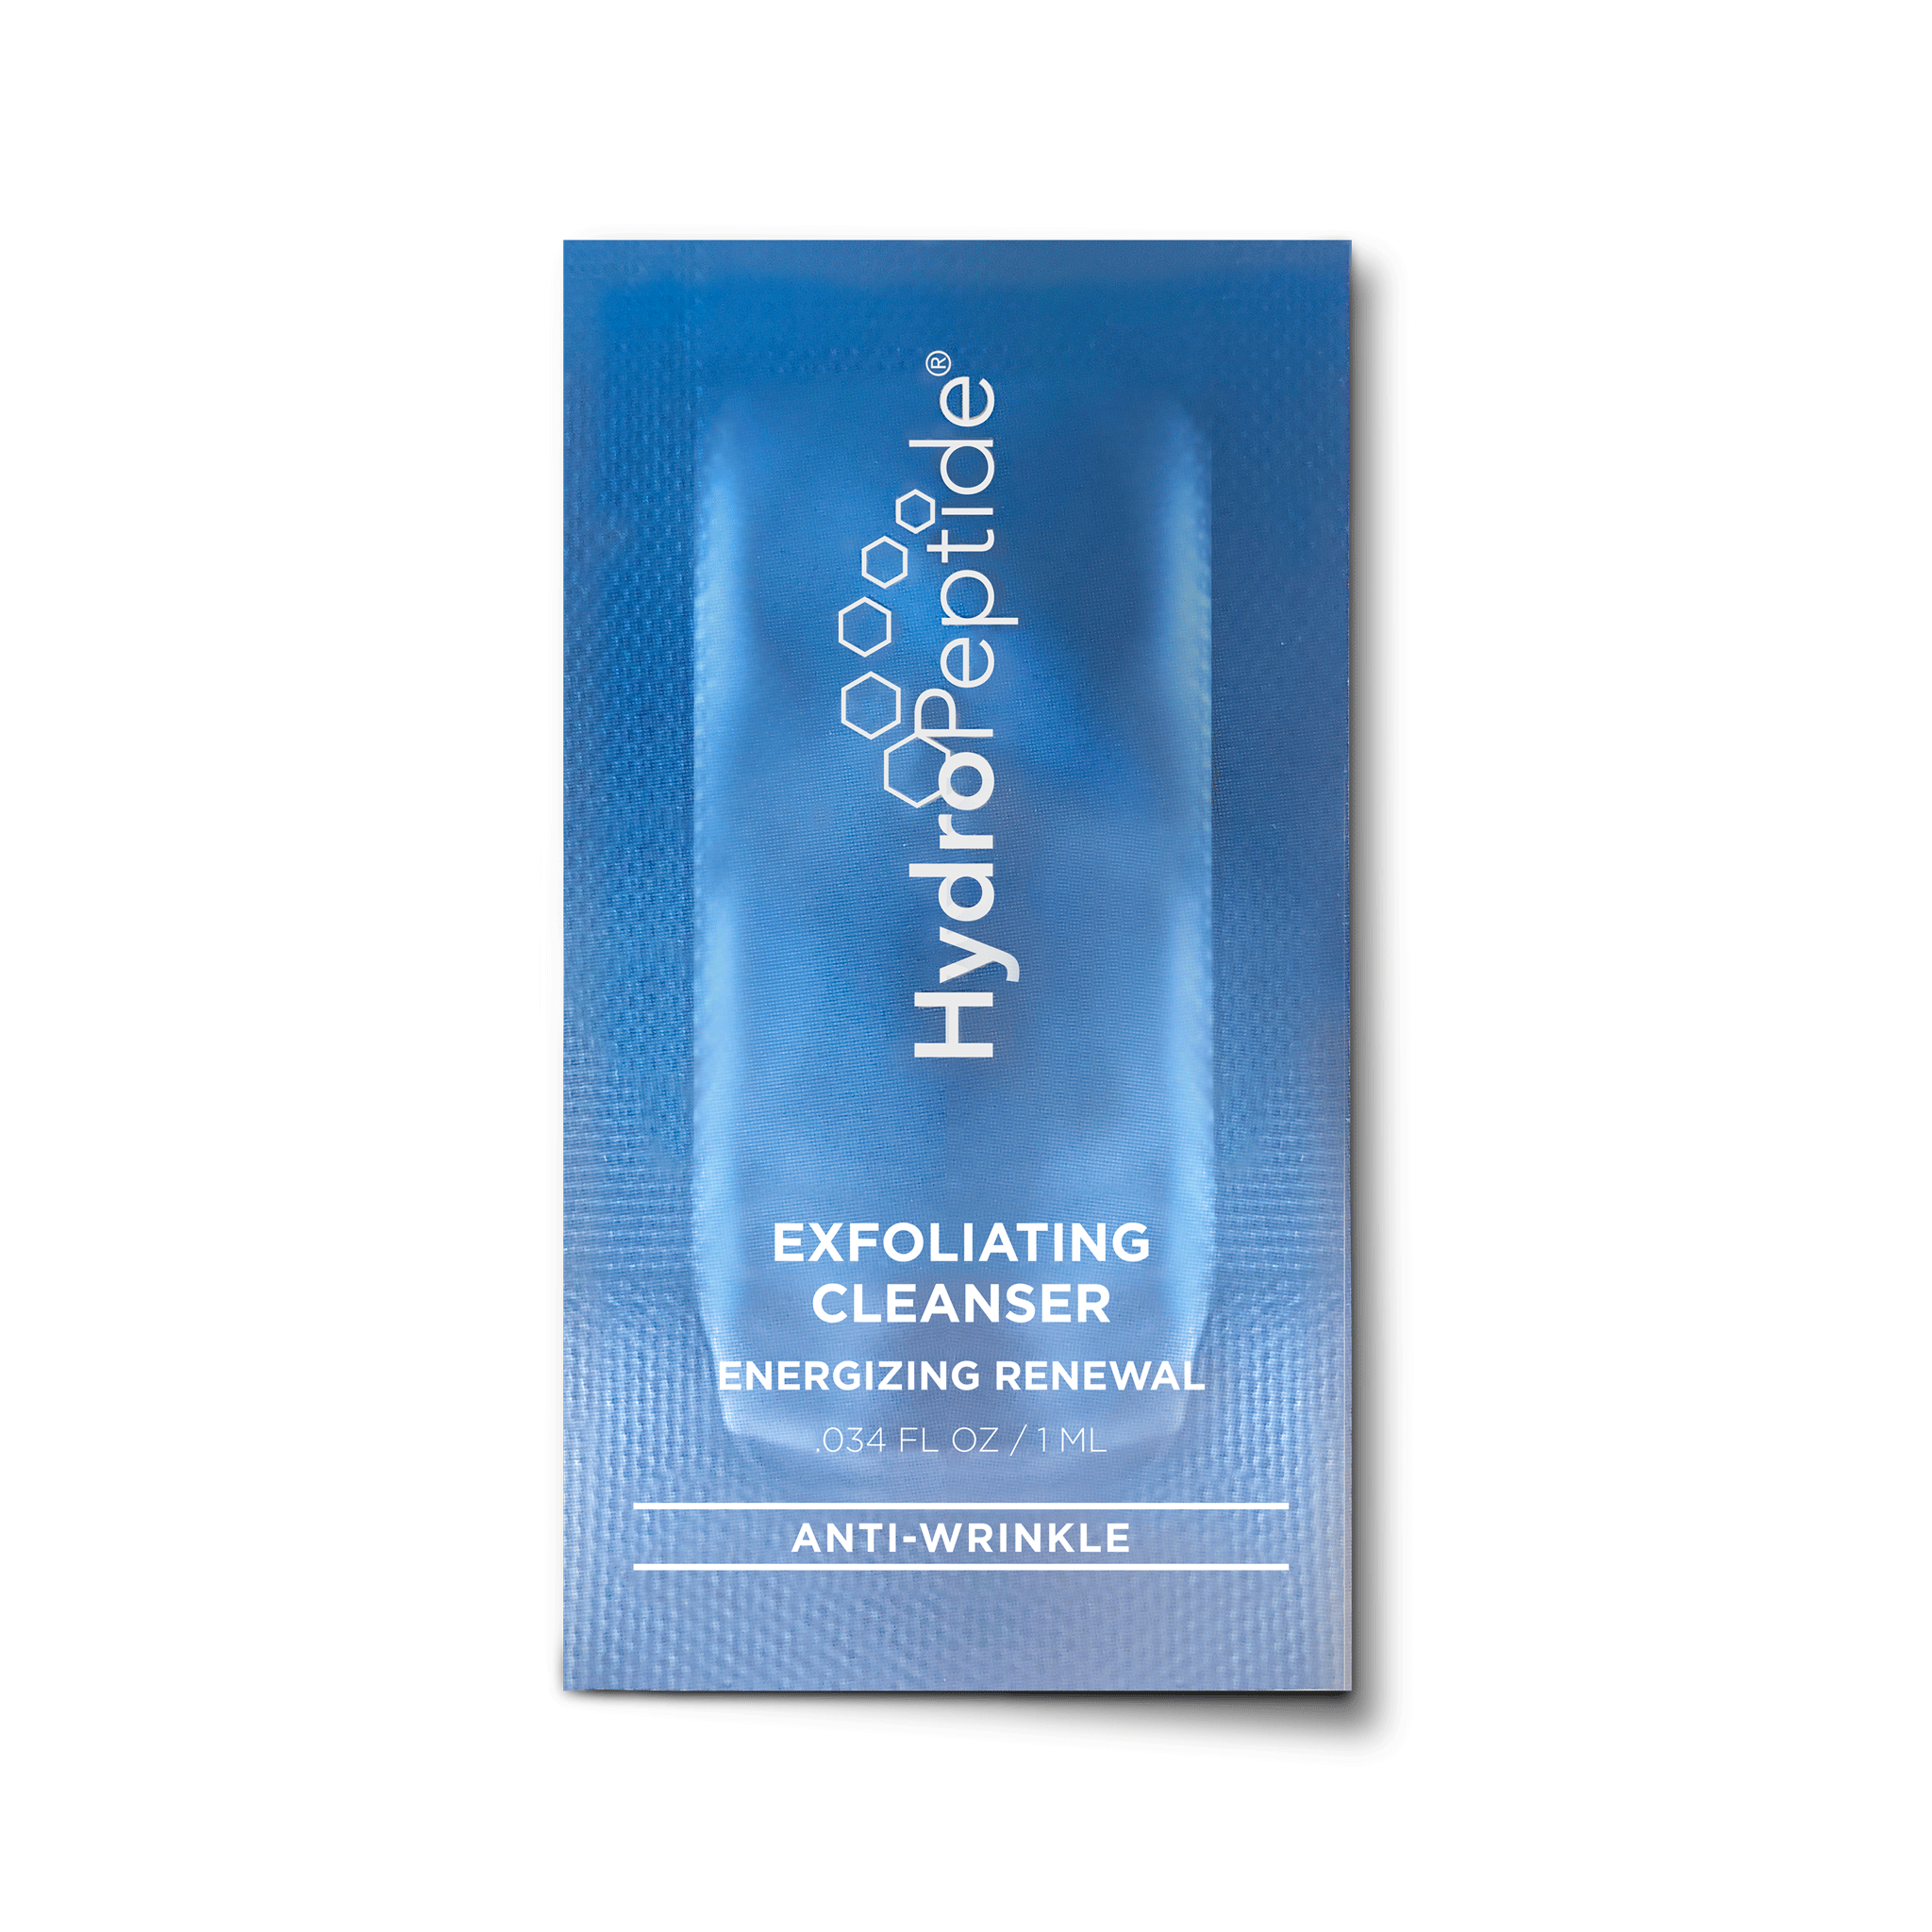 HydroPeptide Exfoliating Cleanser Sample Packs